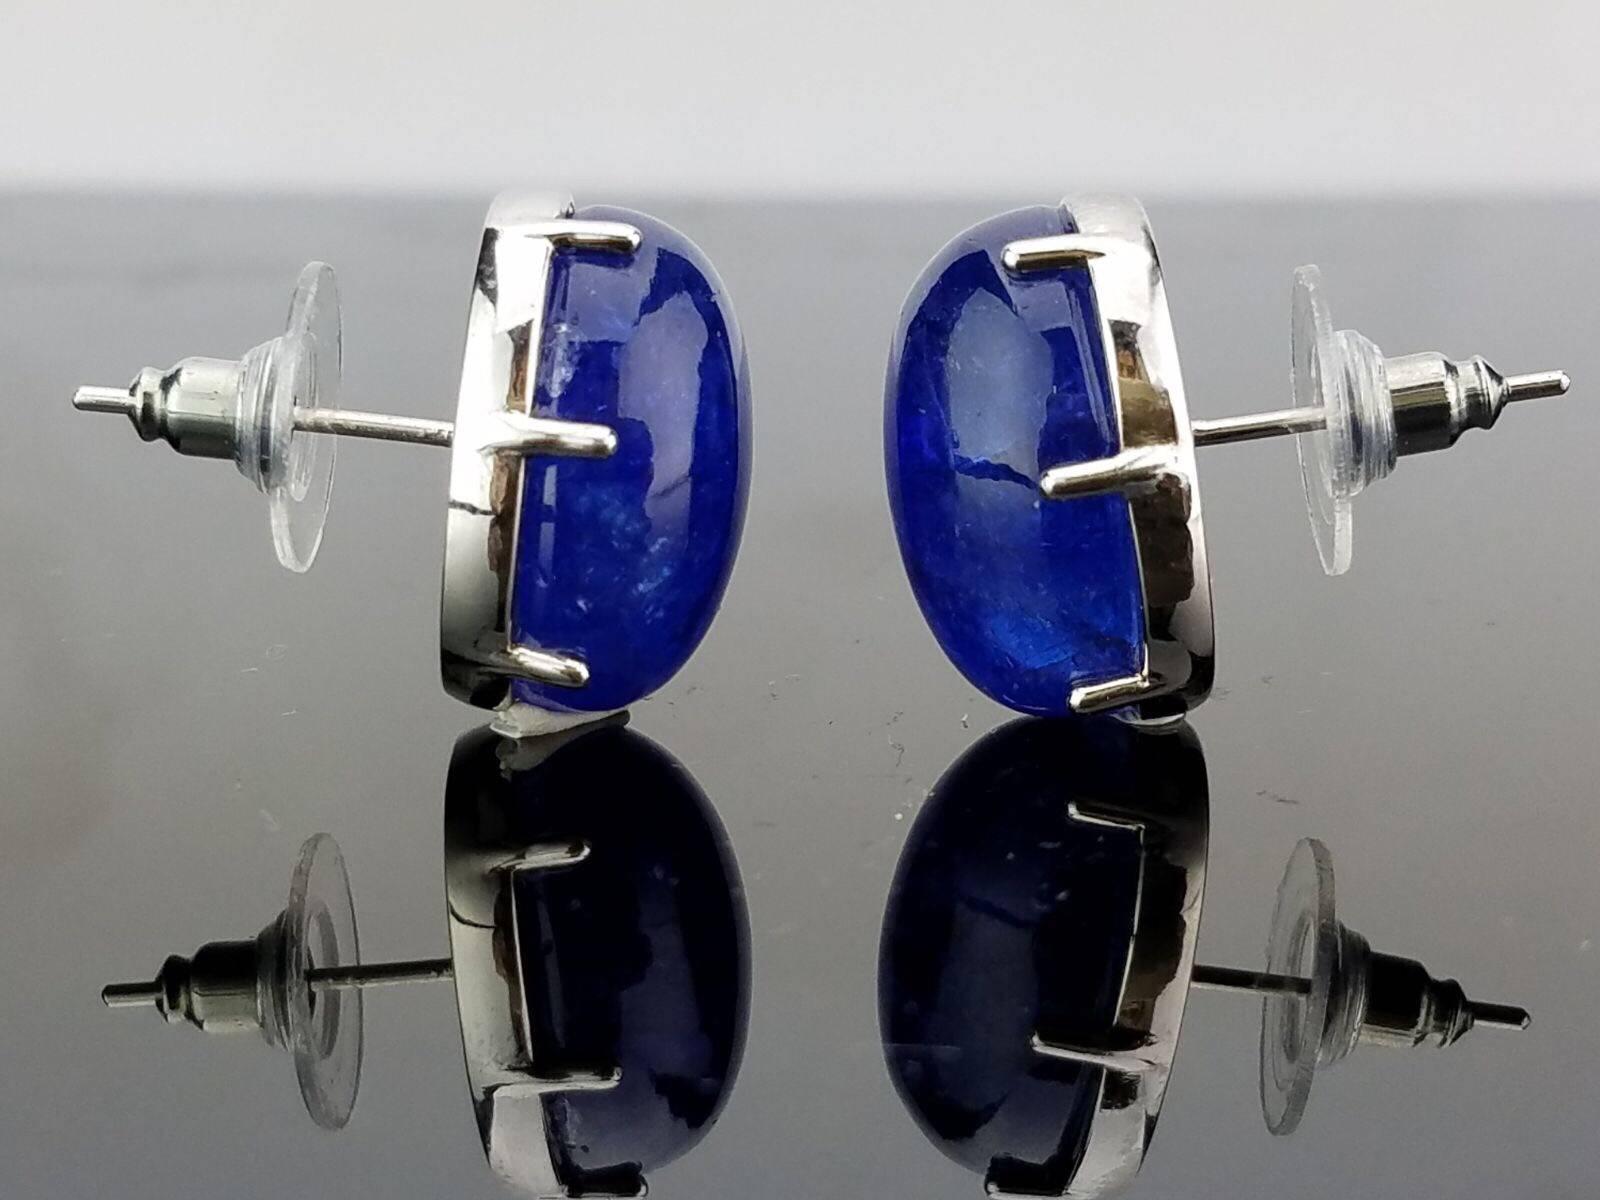 Simple  and Elegant Tanzanite Cabochon Studs, mounted in 18K White Gold

Stone Details: 
Stone: Tanzanite
Cut: Oval, Cabochon
Carat Weight: 48.19 carat

18K Gold: 6.34 grams 

Can provide certificate upon request. 
Can provide cleaning/re-polish